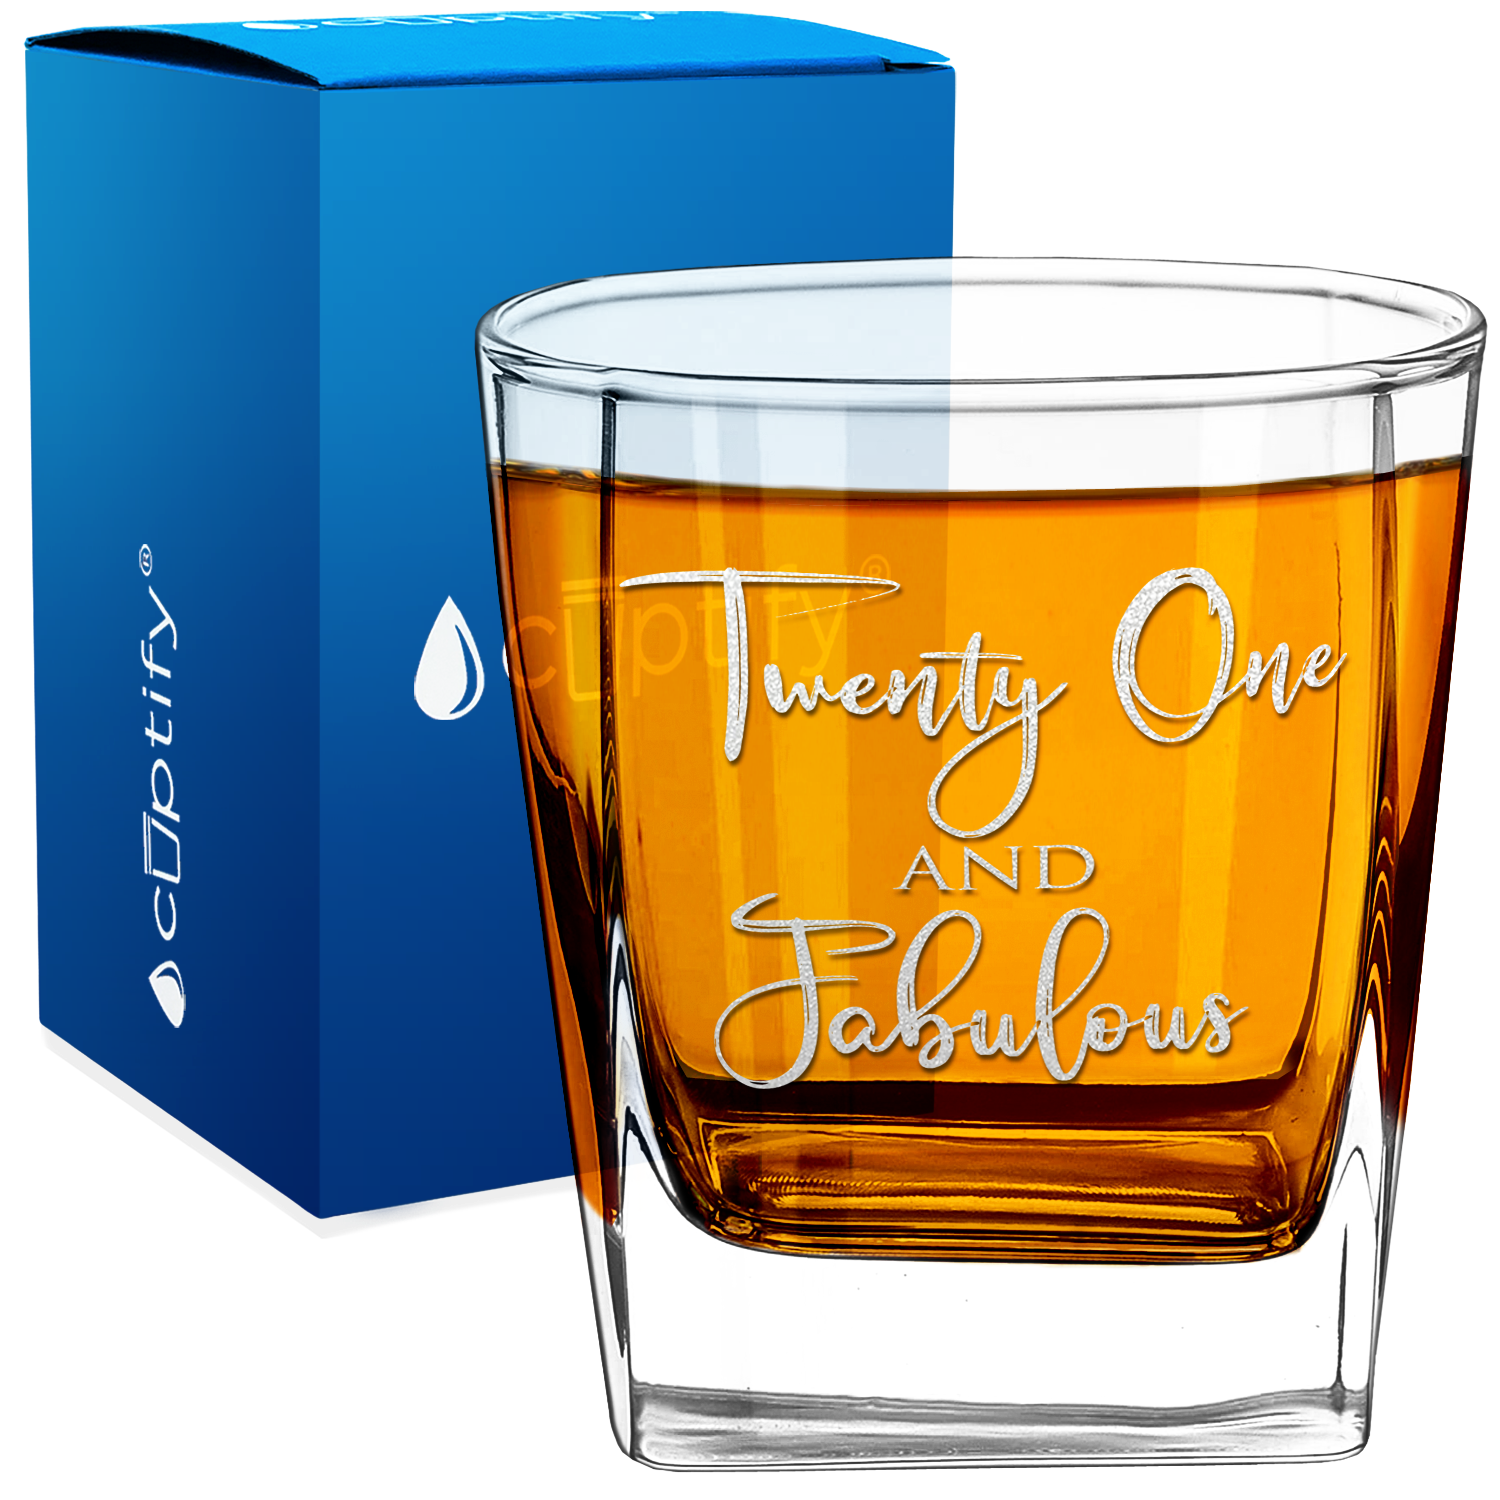 Twenty One and Fabulous 12oz Double Old Fashioned Glass